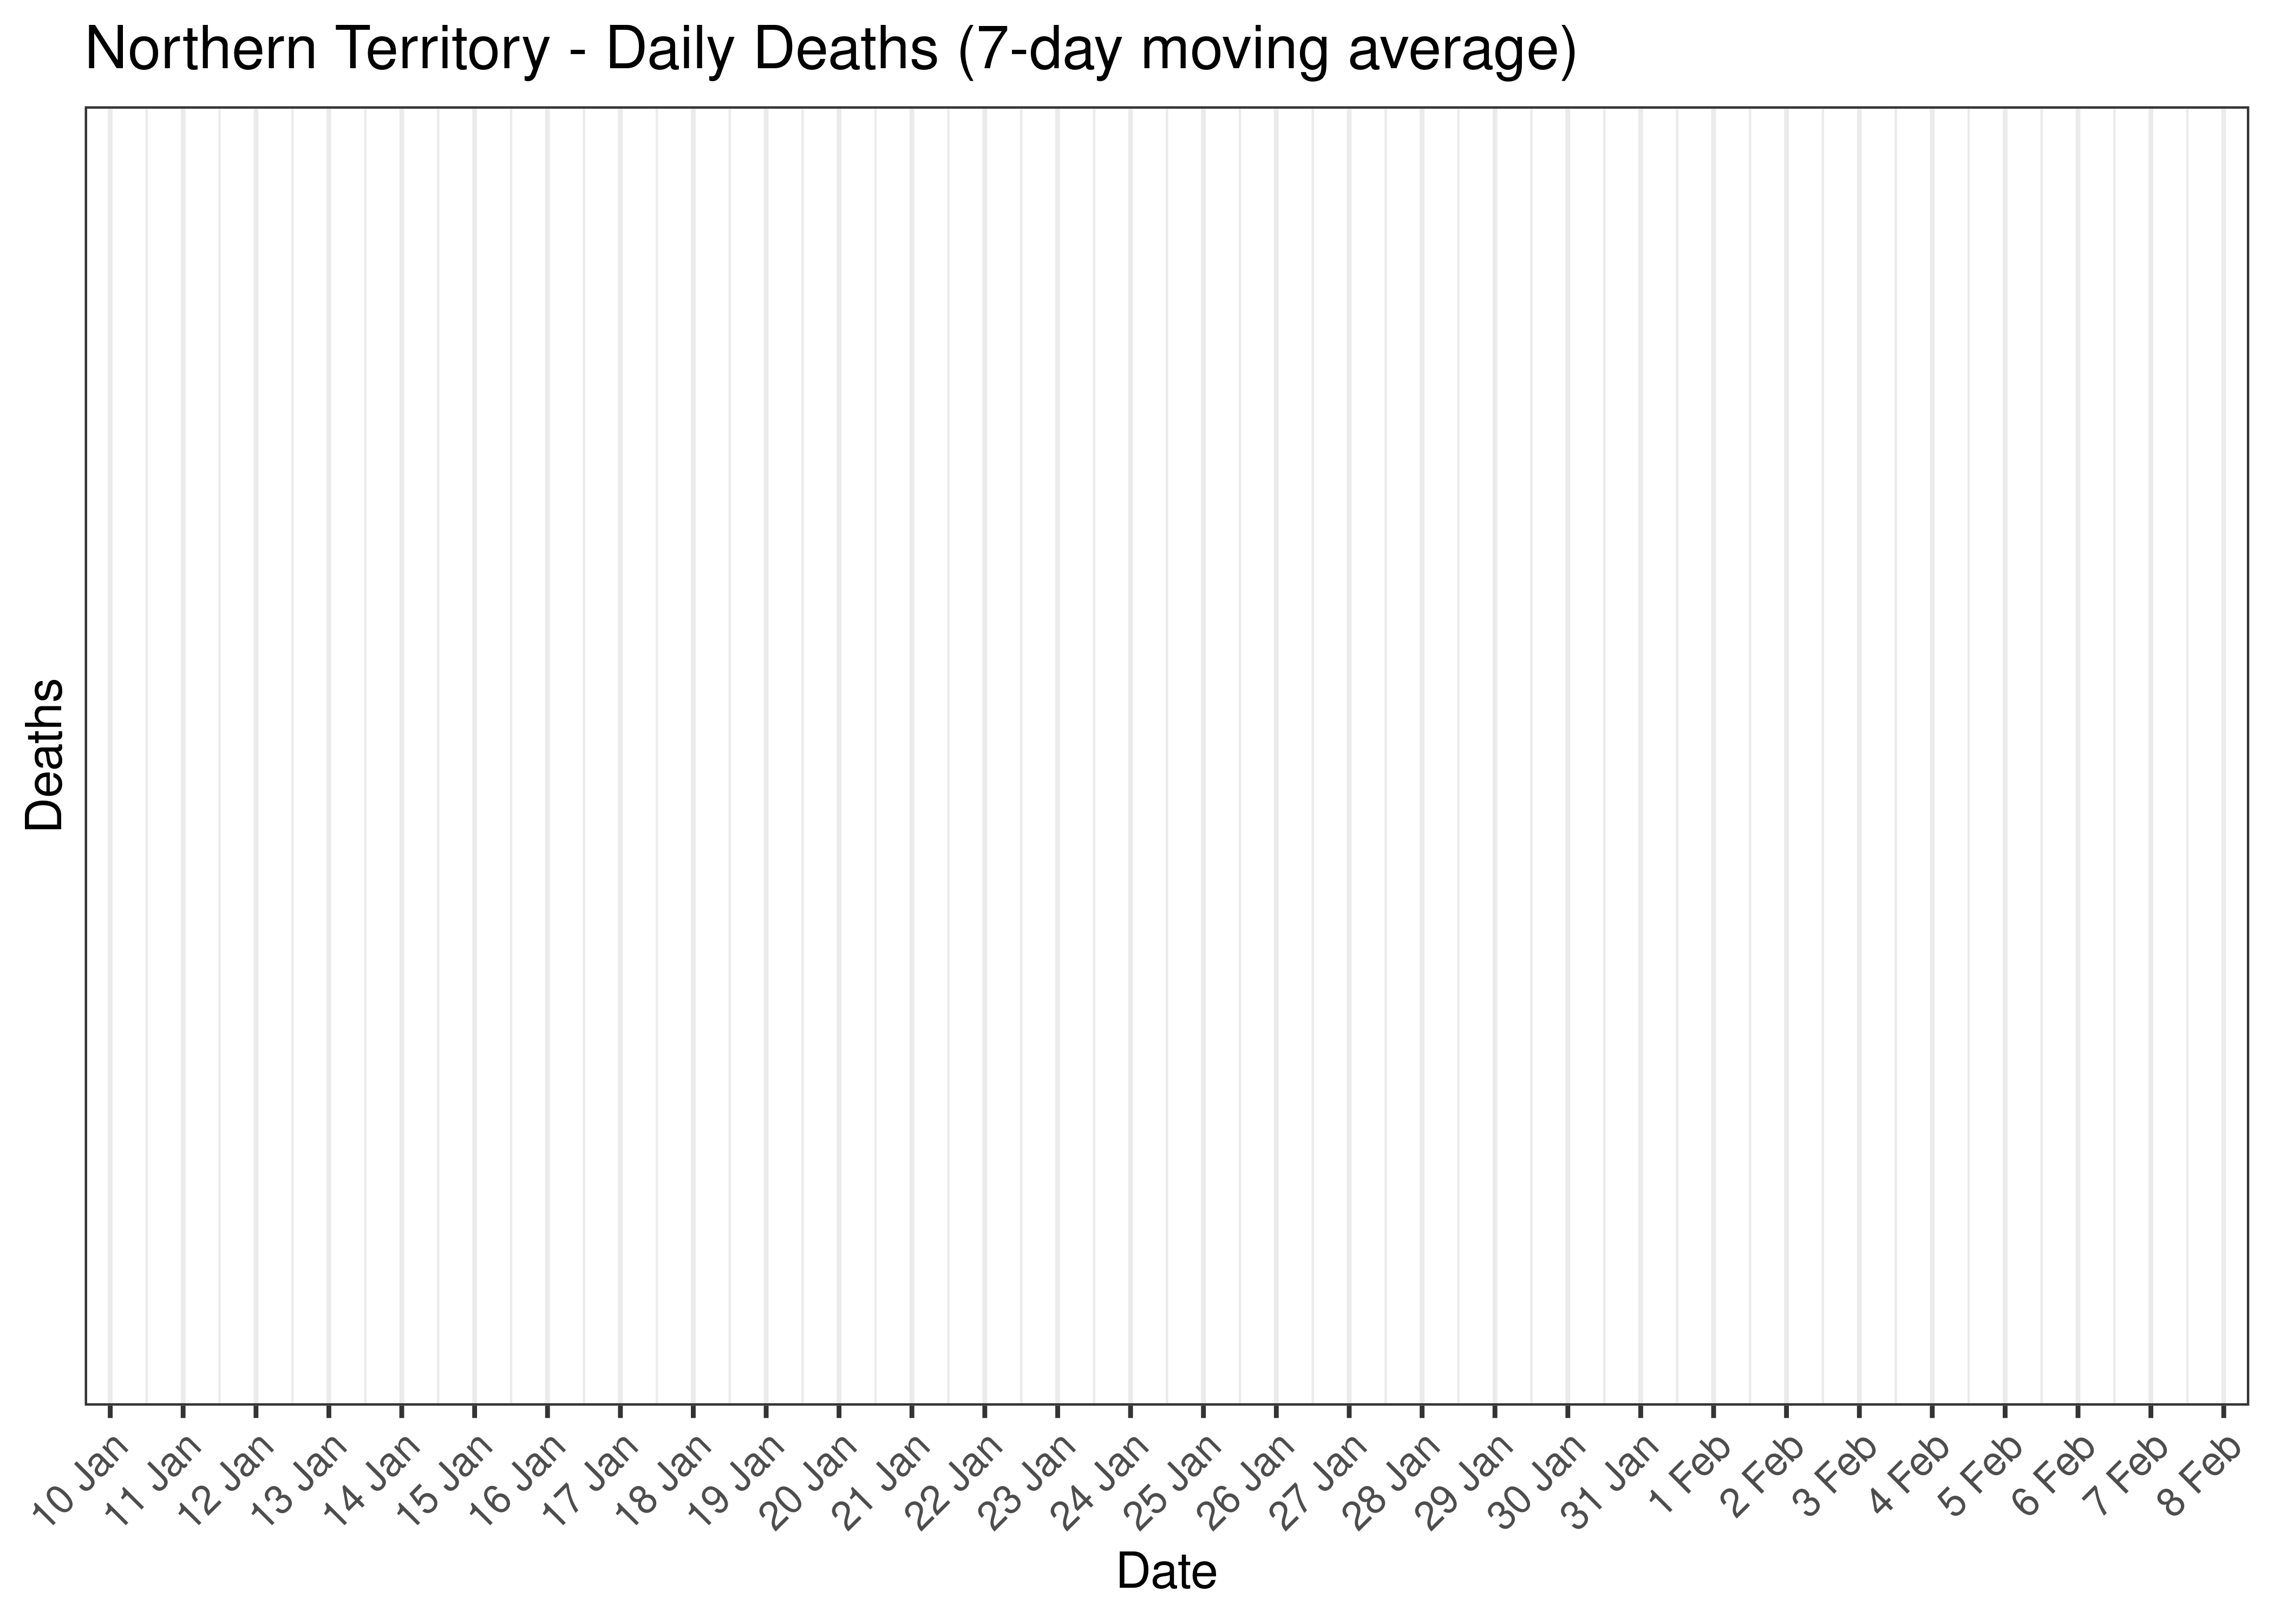 Northern Territory - Daily Deaths for Last 30-days (7-day moving average)